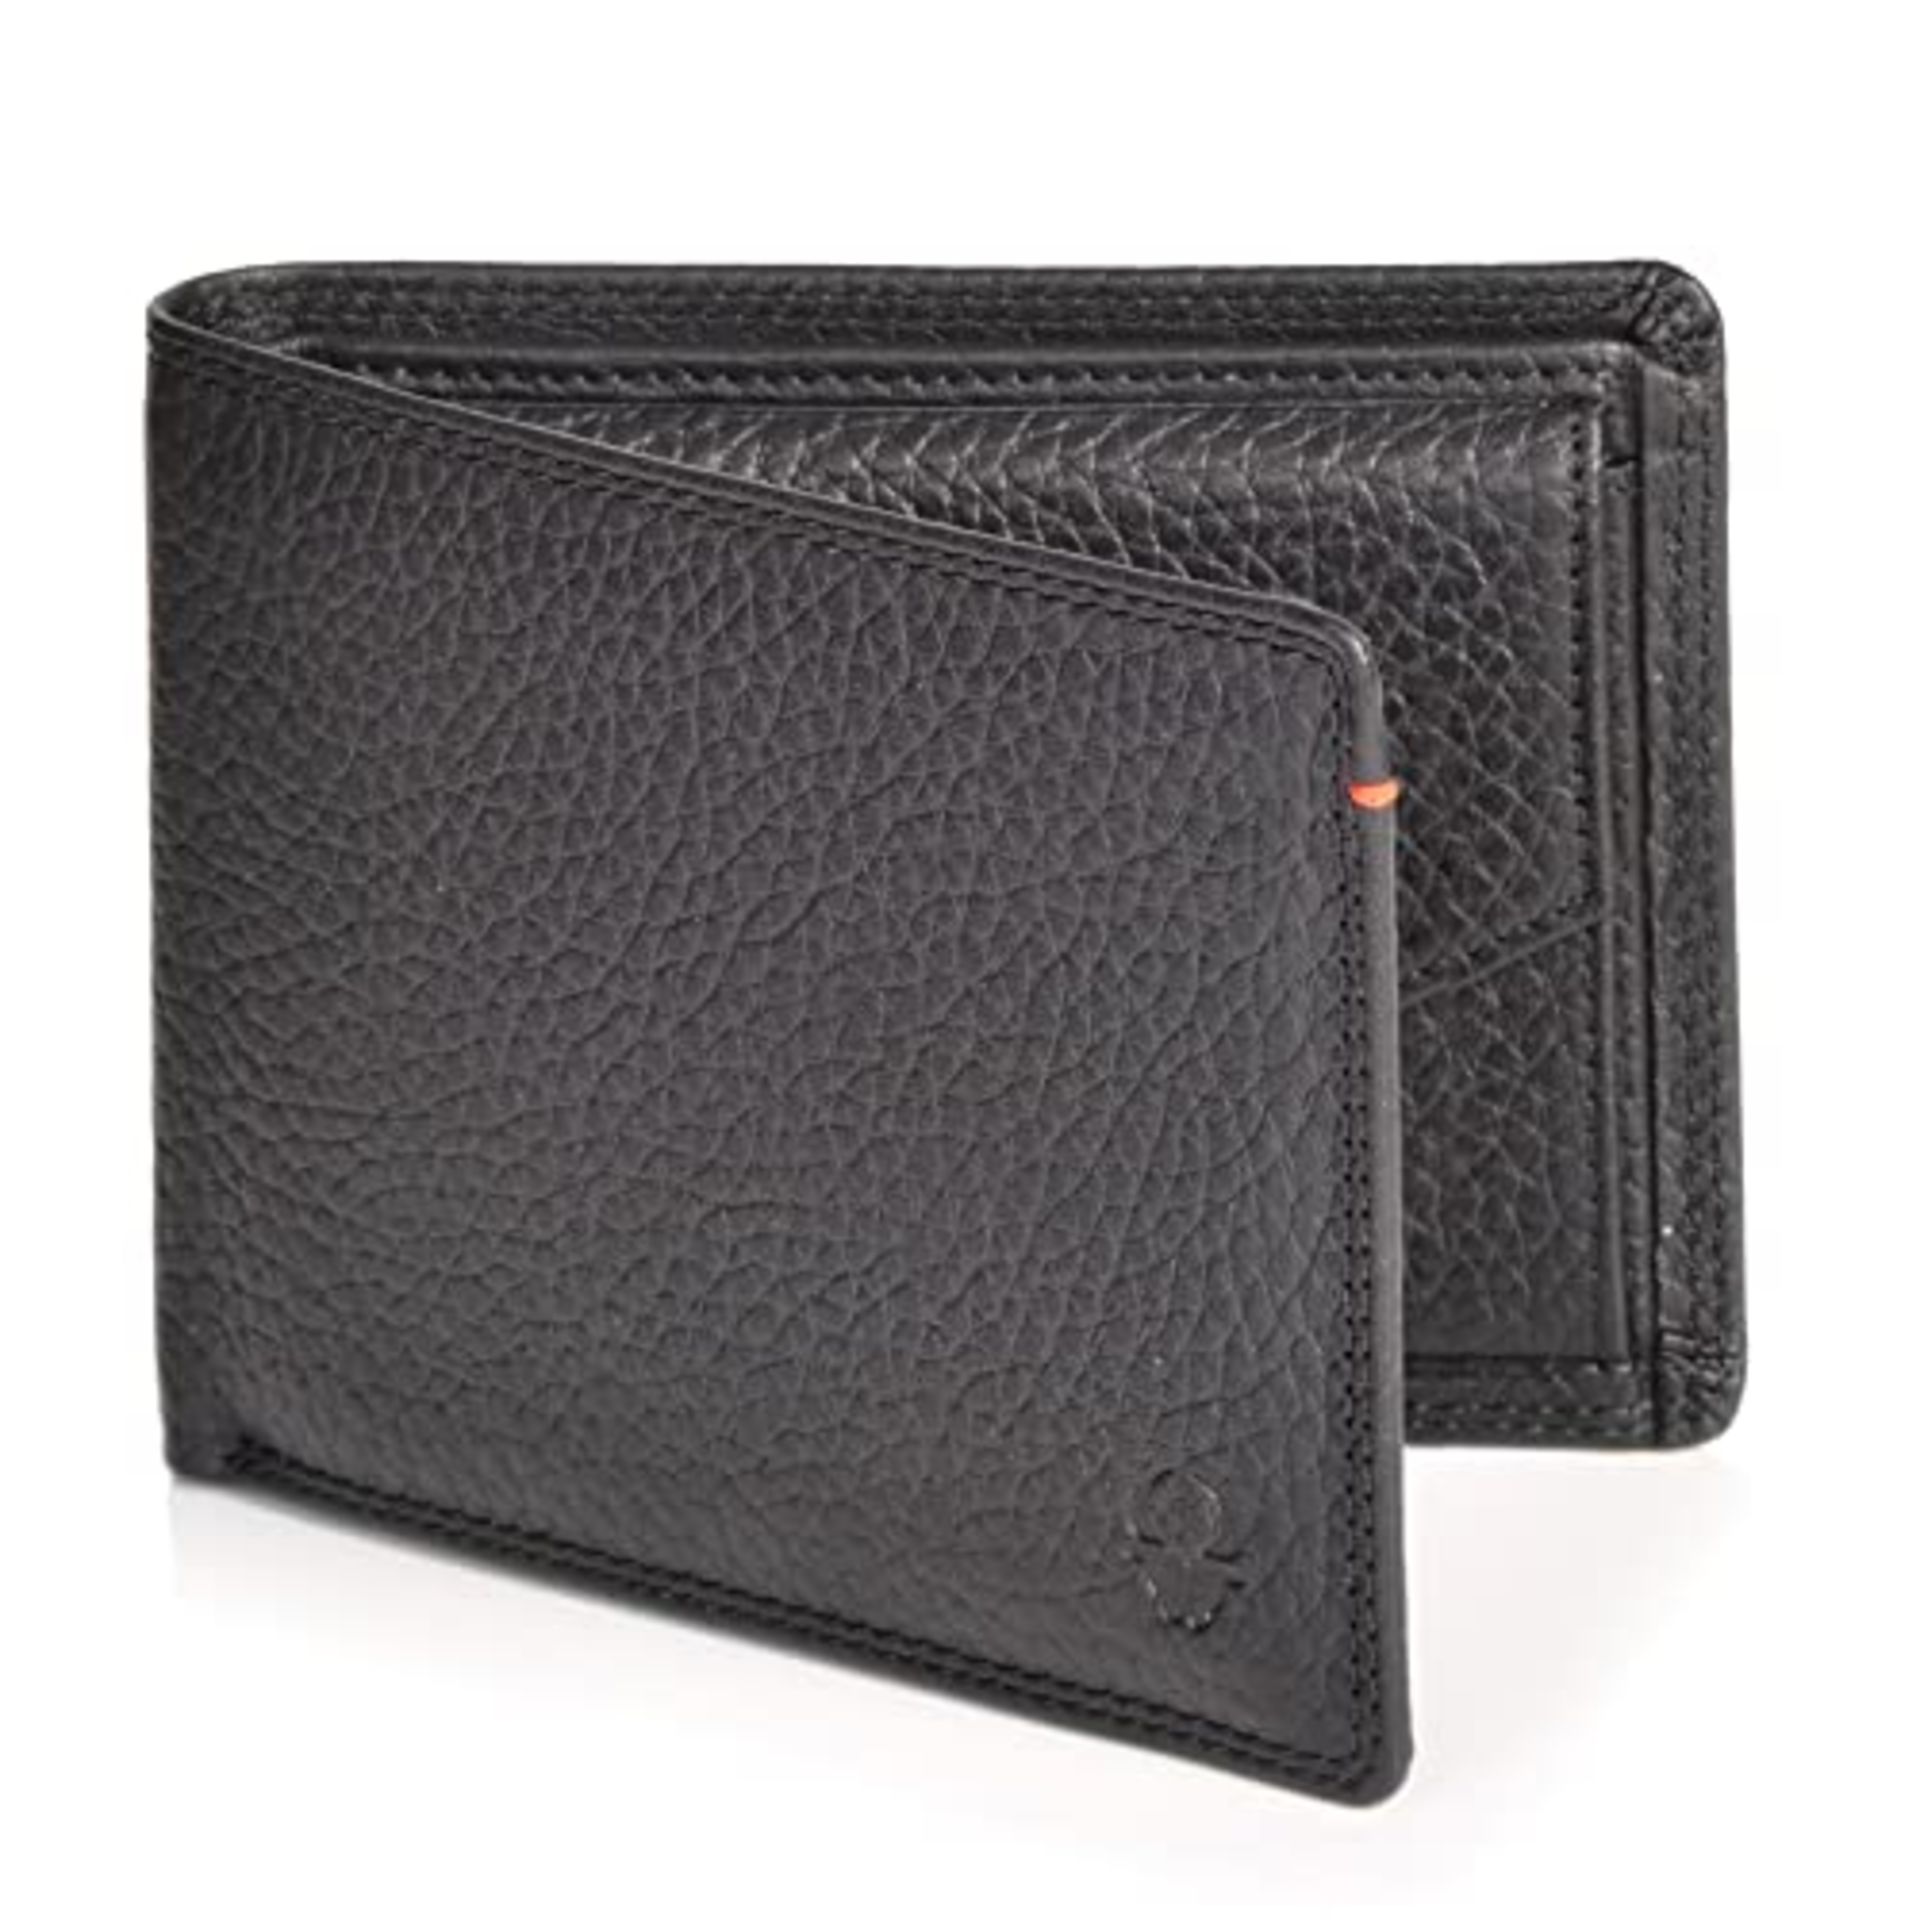 RRP £42.43 BRAND NEW STOCK DONBOLSO Zurich I Large Leather Wallet for Men with